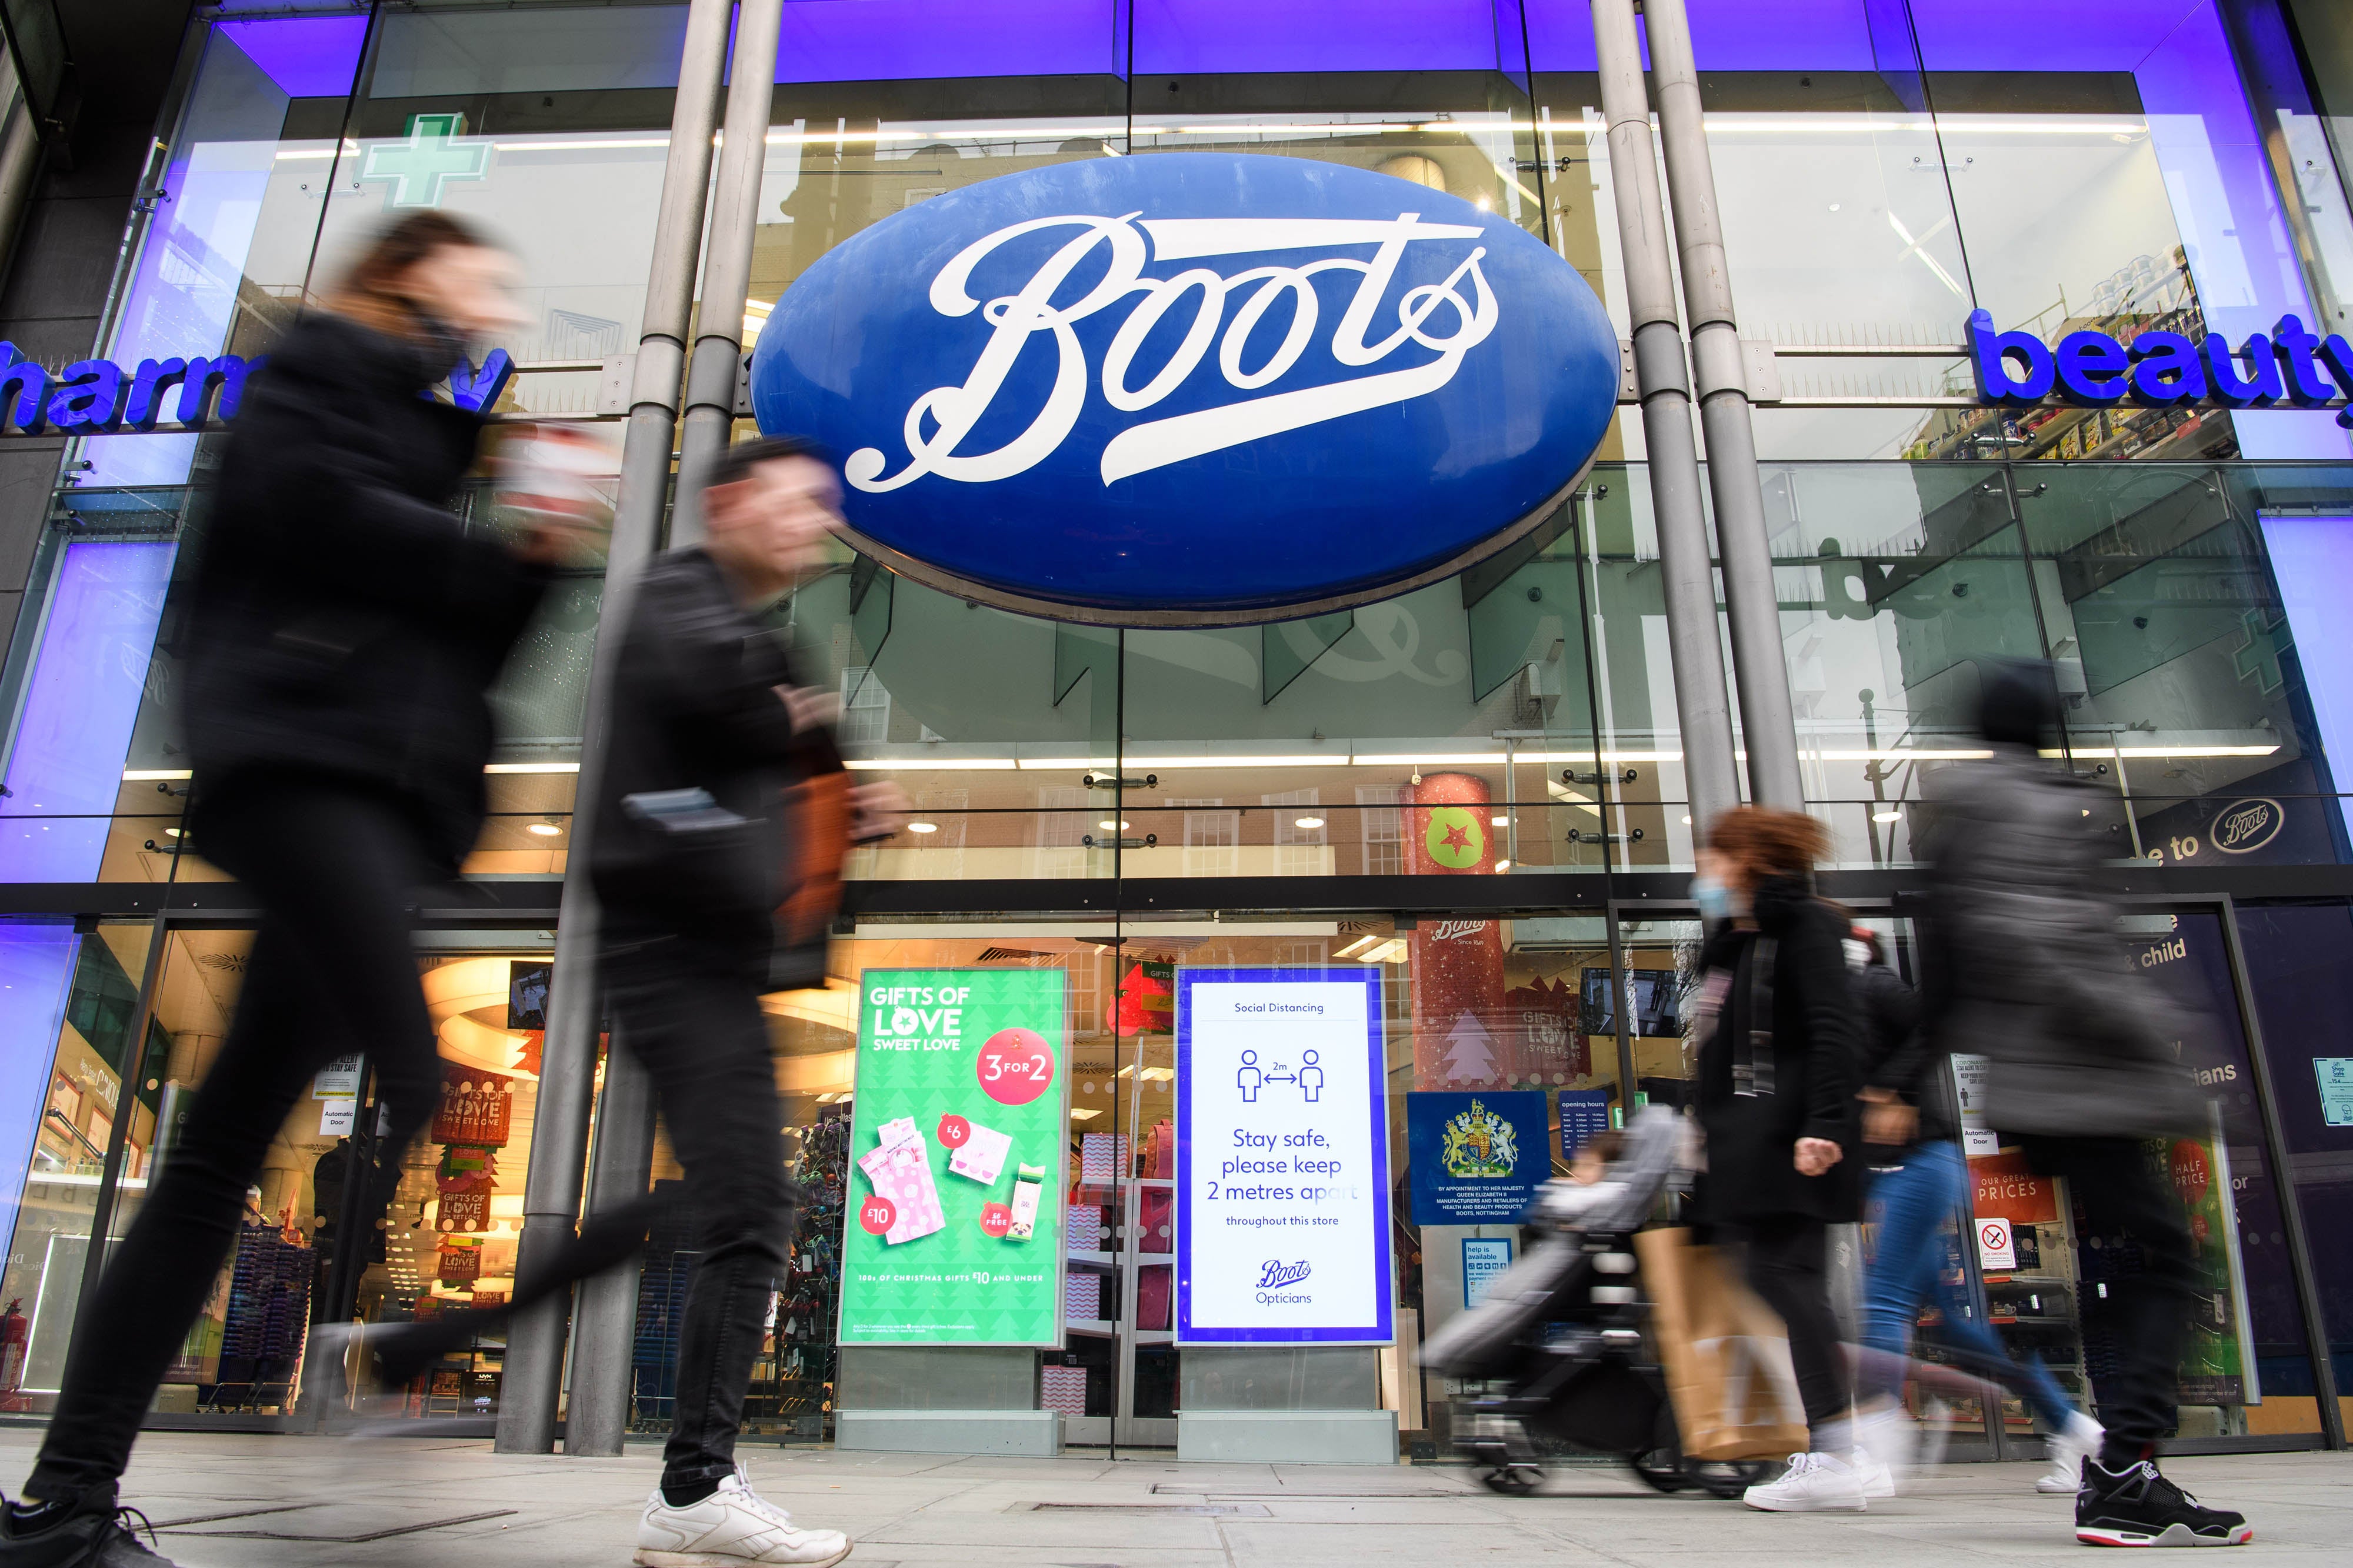 The owner said strong performances by the Boots brands ‘exceeded expectations despite challenging conditions’